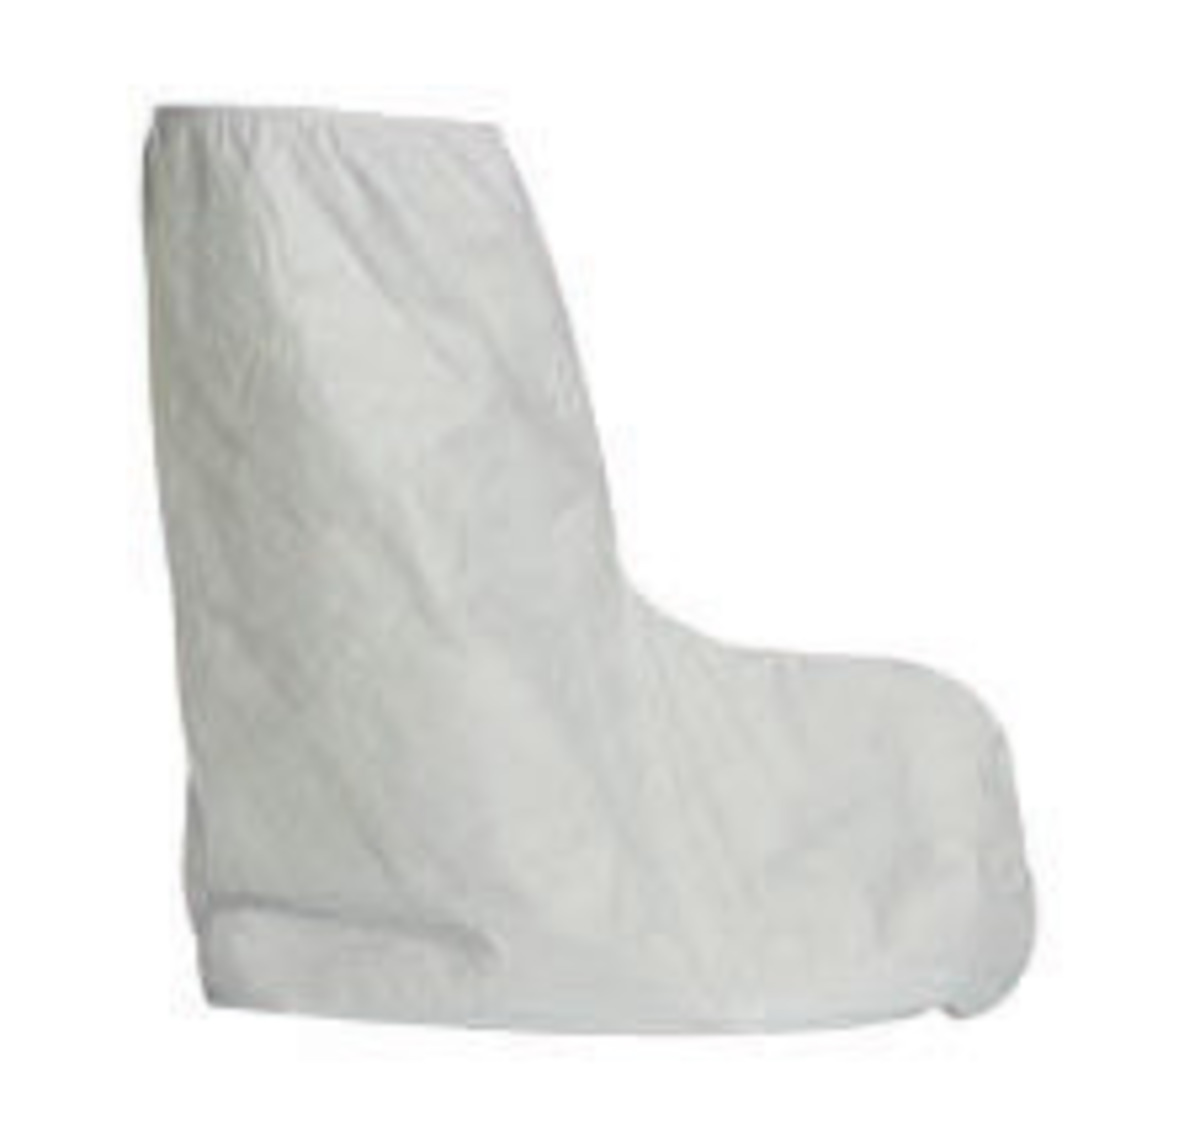 DuPont™ White Tyvek® 400 Disposable Shoe Cover (Availability restrictions apply.)